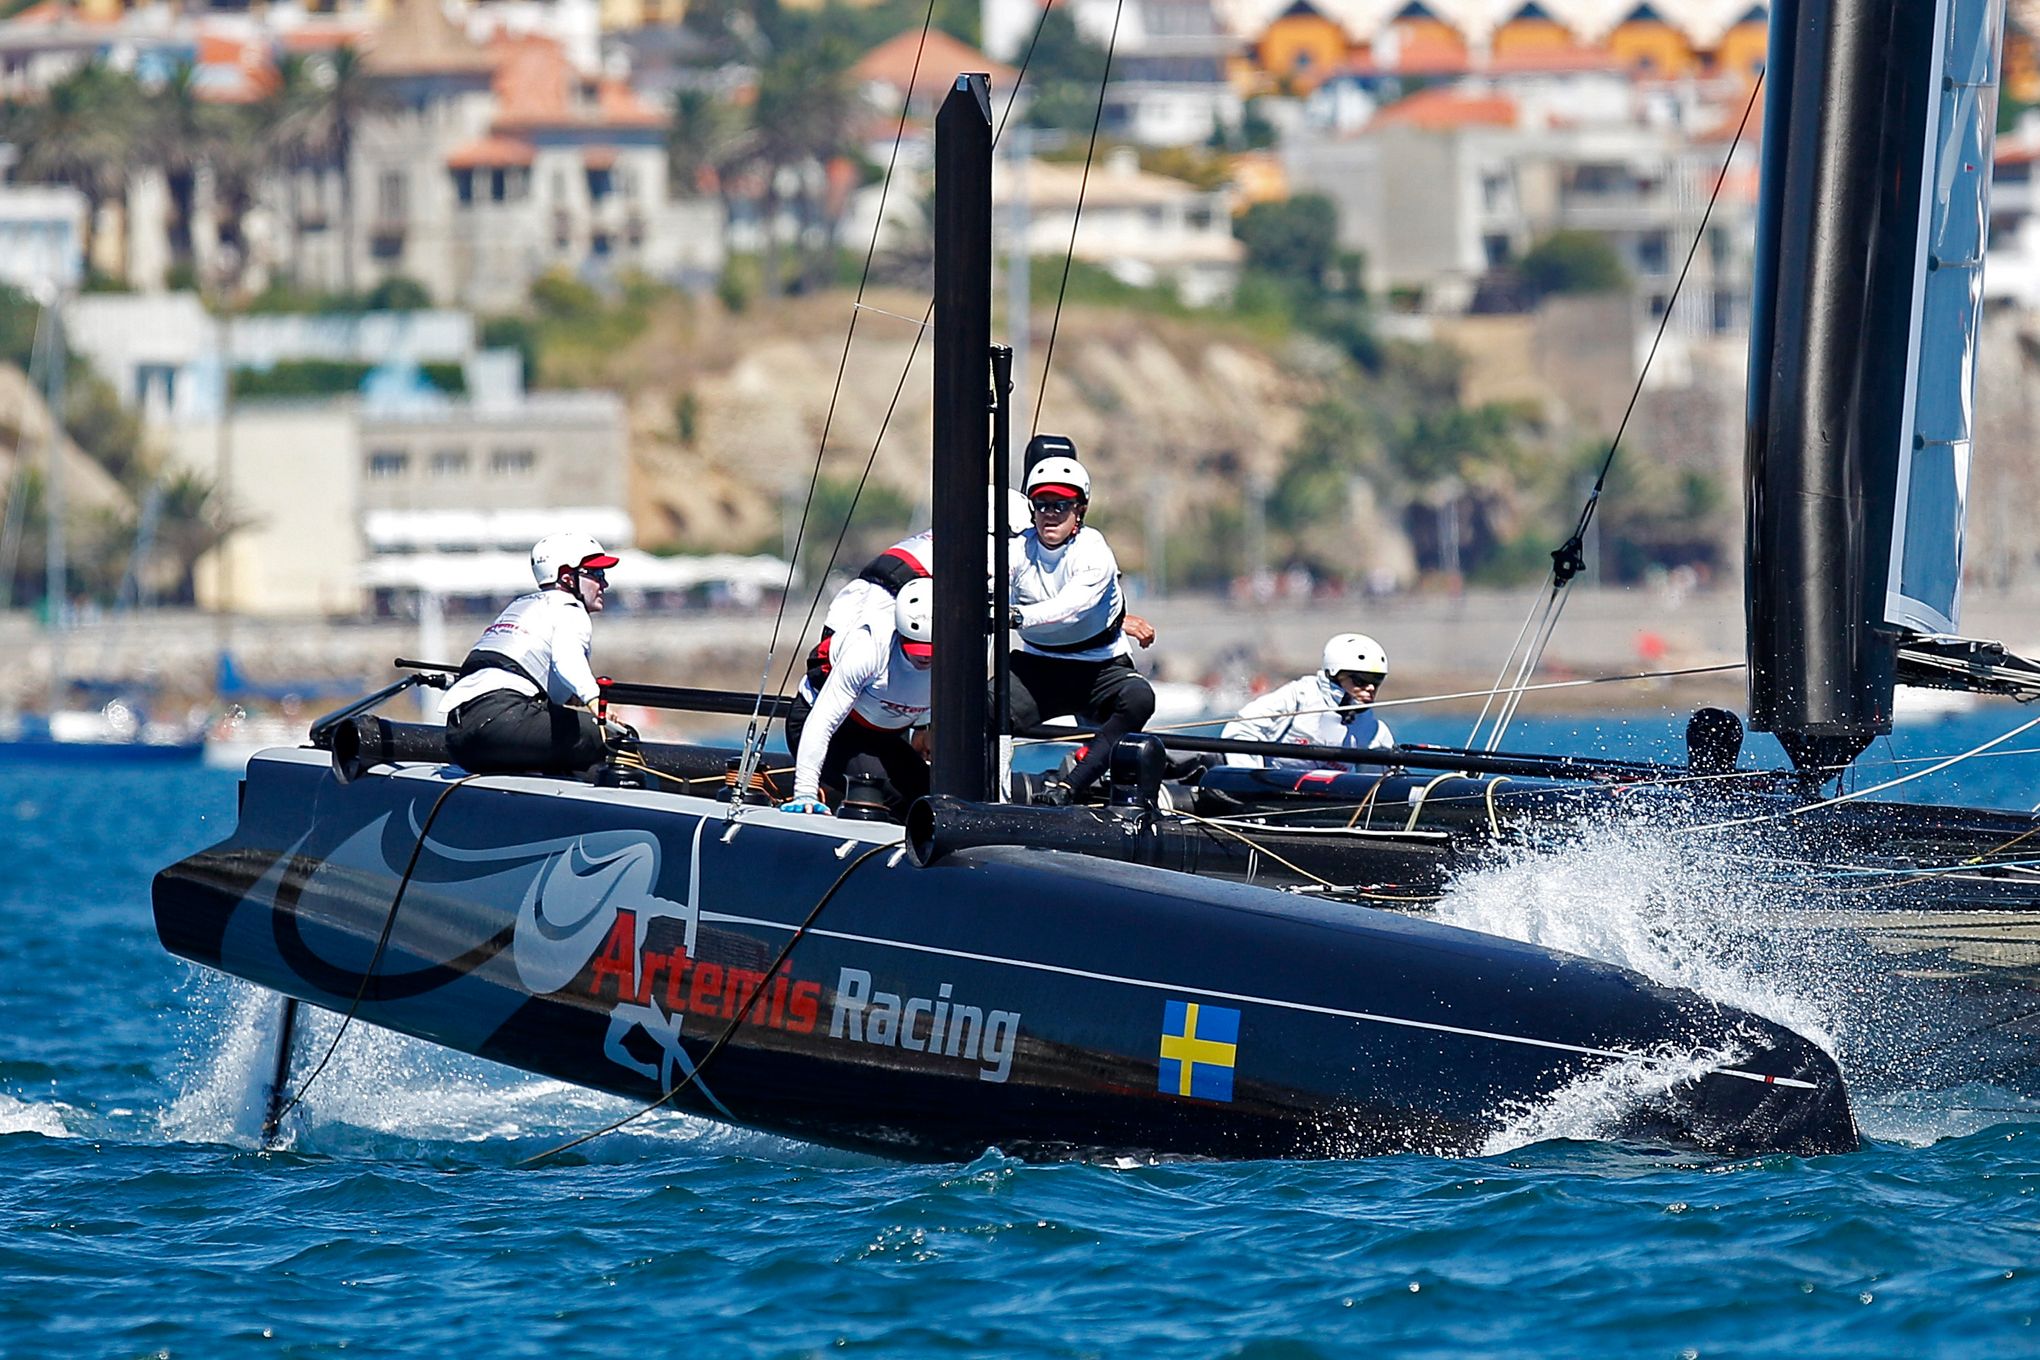 America's Cup teams begin to emerge from lockdowns | The Seattle Times